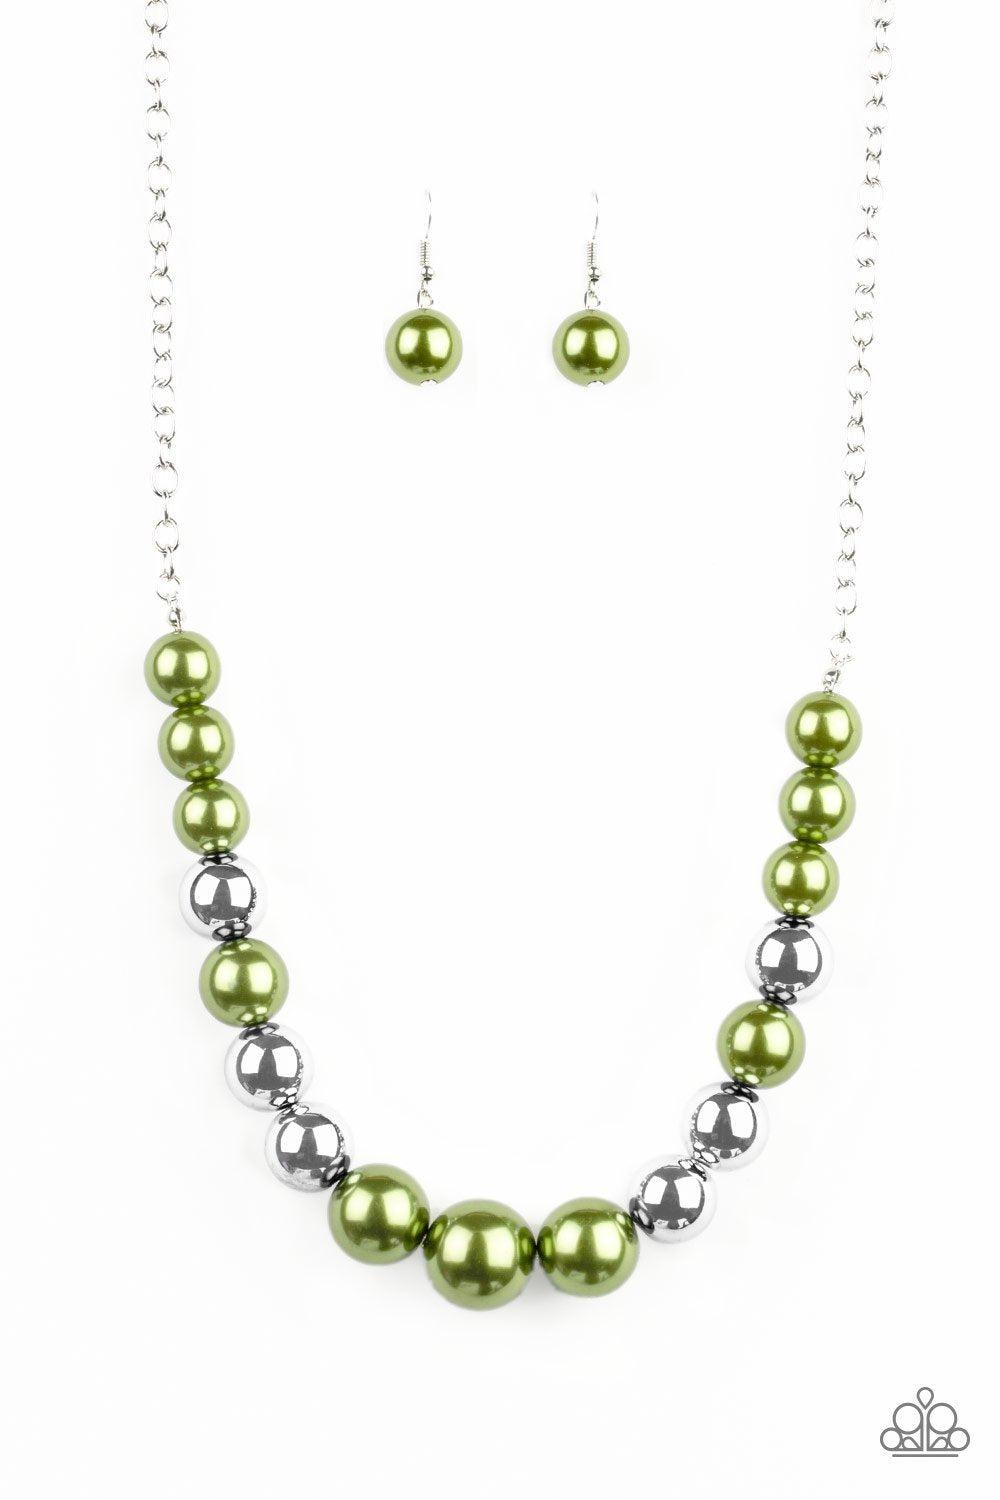 Take Note Green and Silver Necklace - Paparazzi Accessories - lightbox -CarasShop.com - $5 Jewelry by Cara Jewels